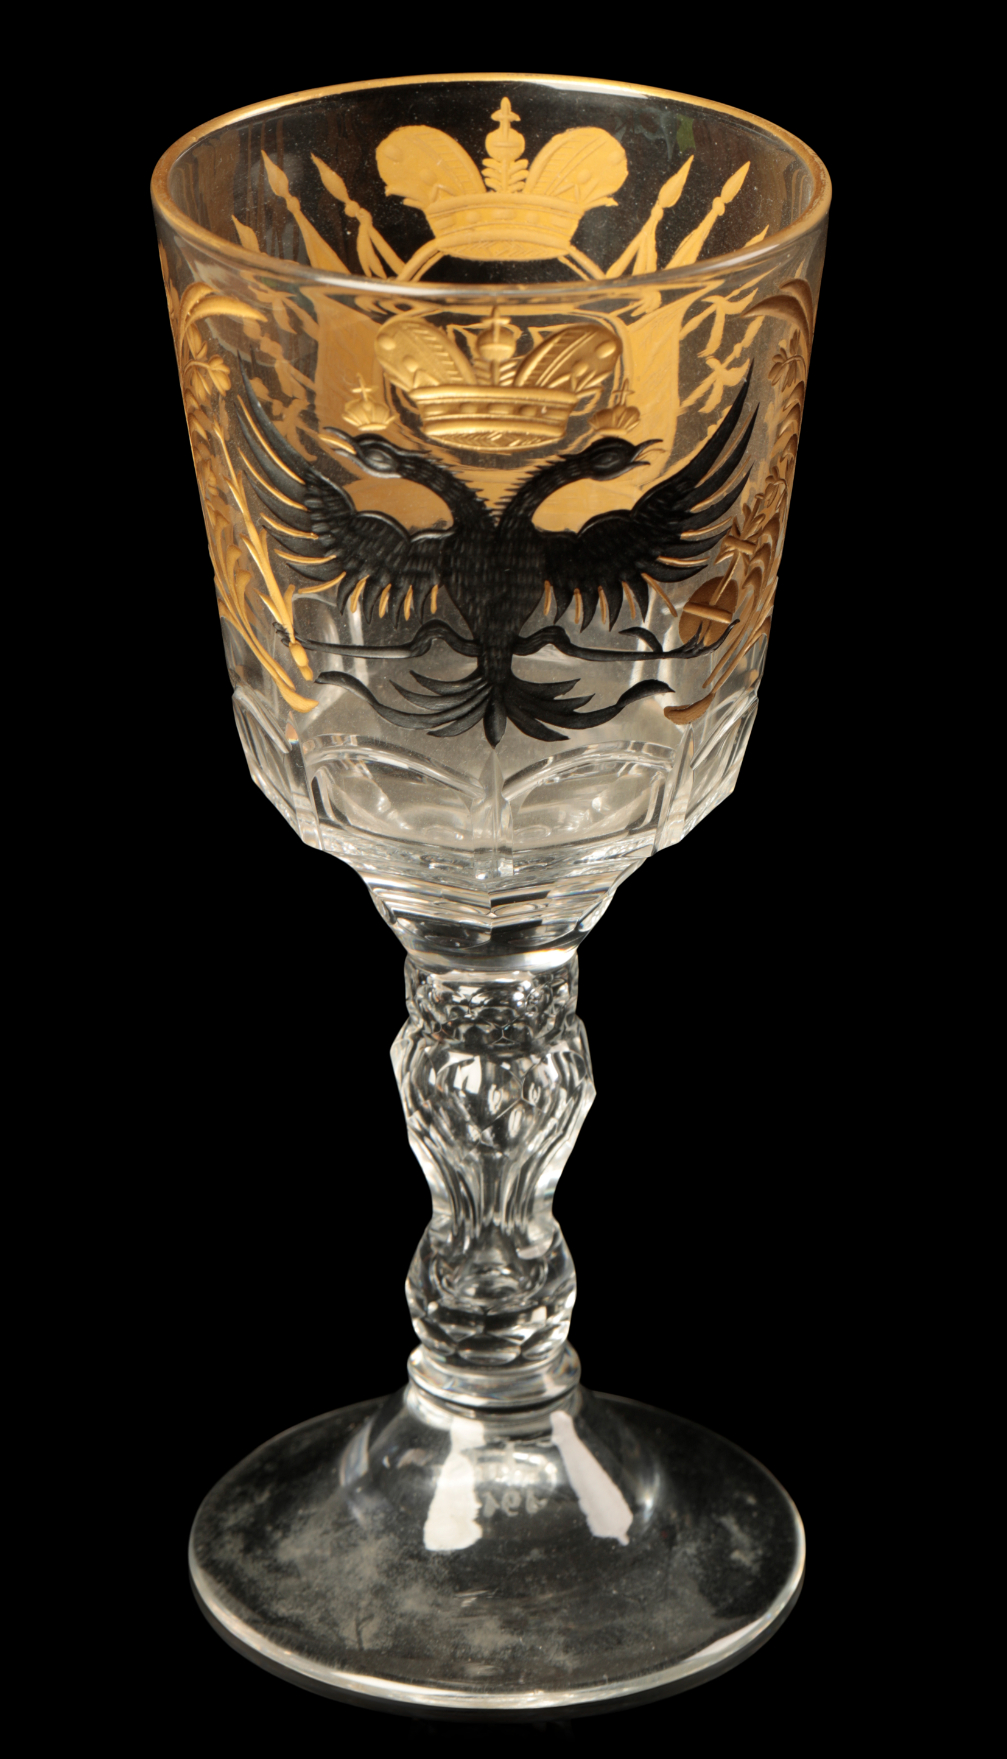 A RUSSIAN WINE GLASS FROM THE IMPERIAL